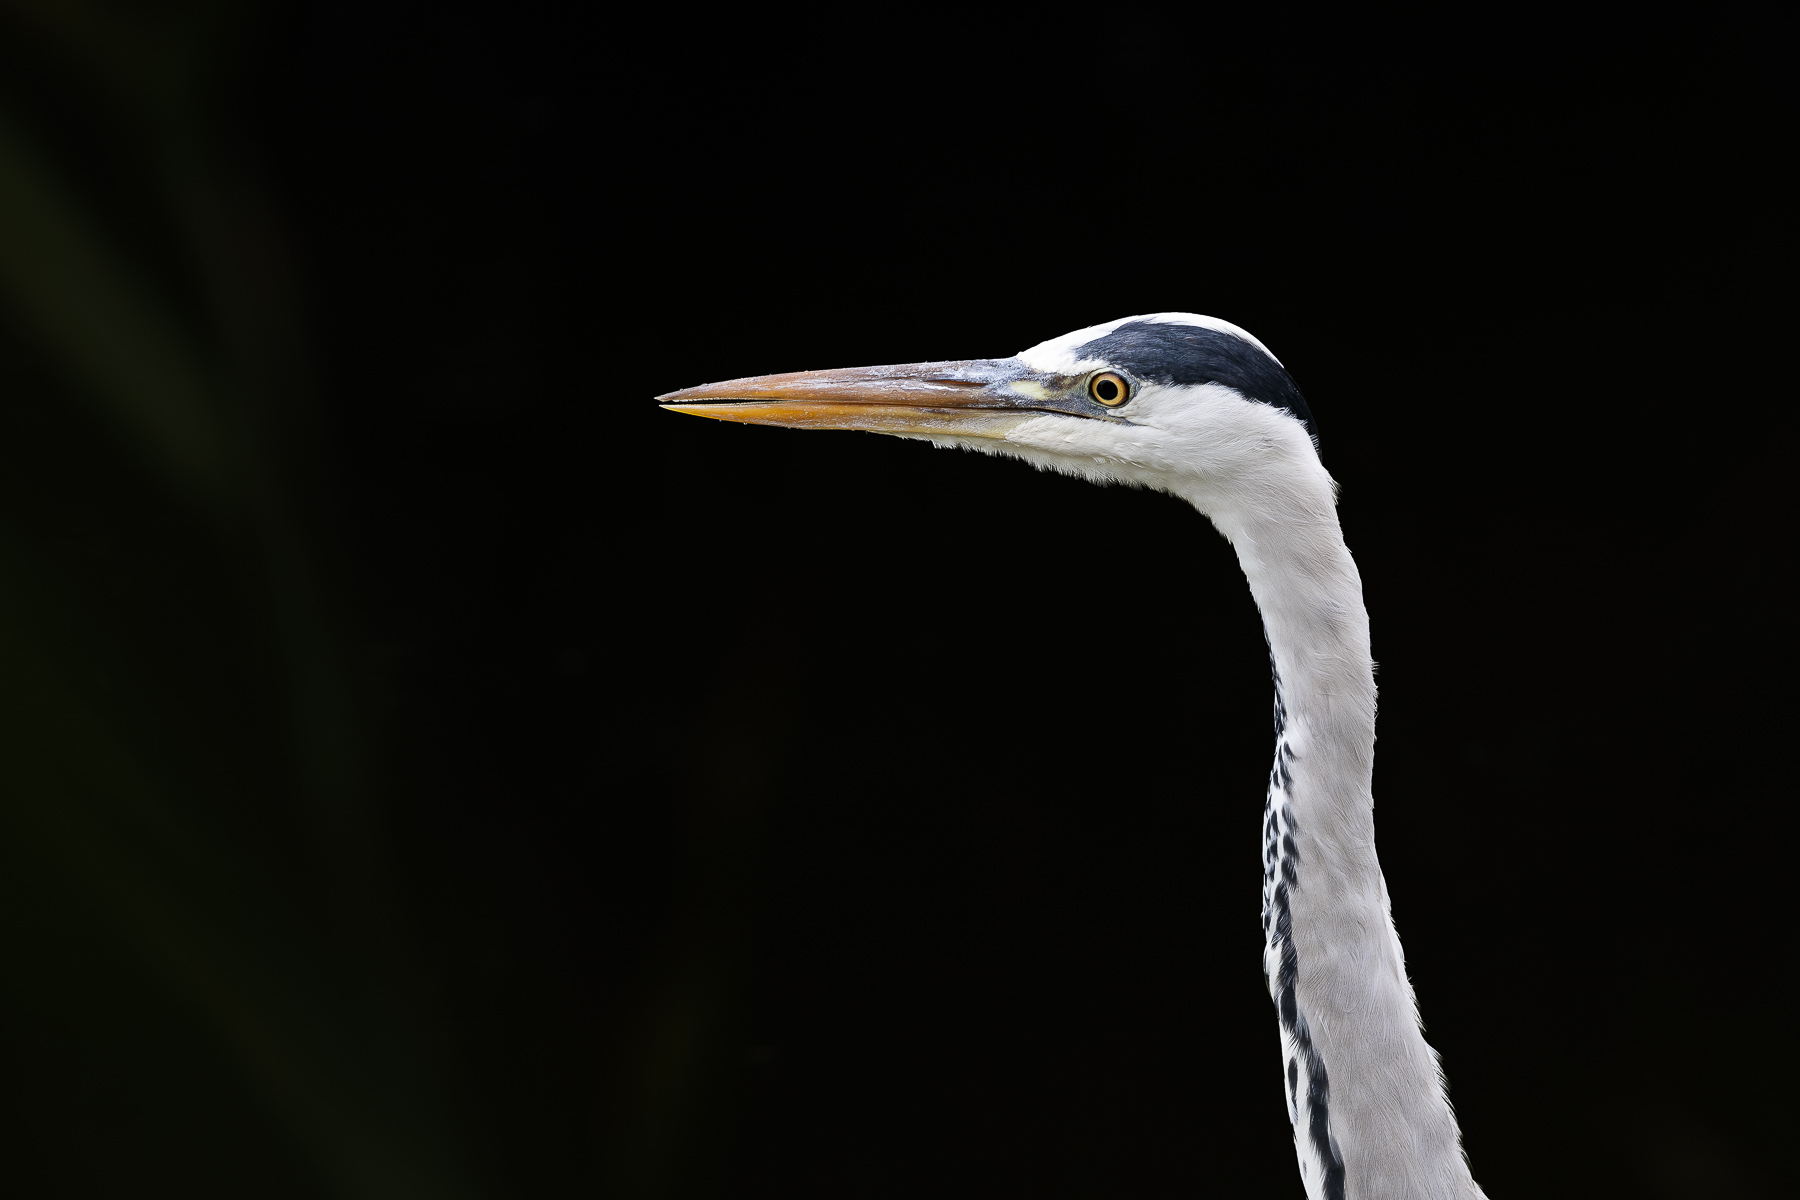 Graceful Grey Heron captured in Camargue, France. Adorn your space with the elegance of this magnificent bird in its natural habitat. Ideal as a gift for animal lovers!